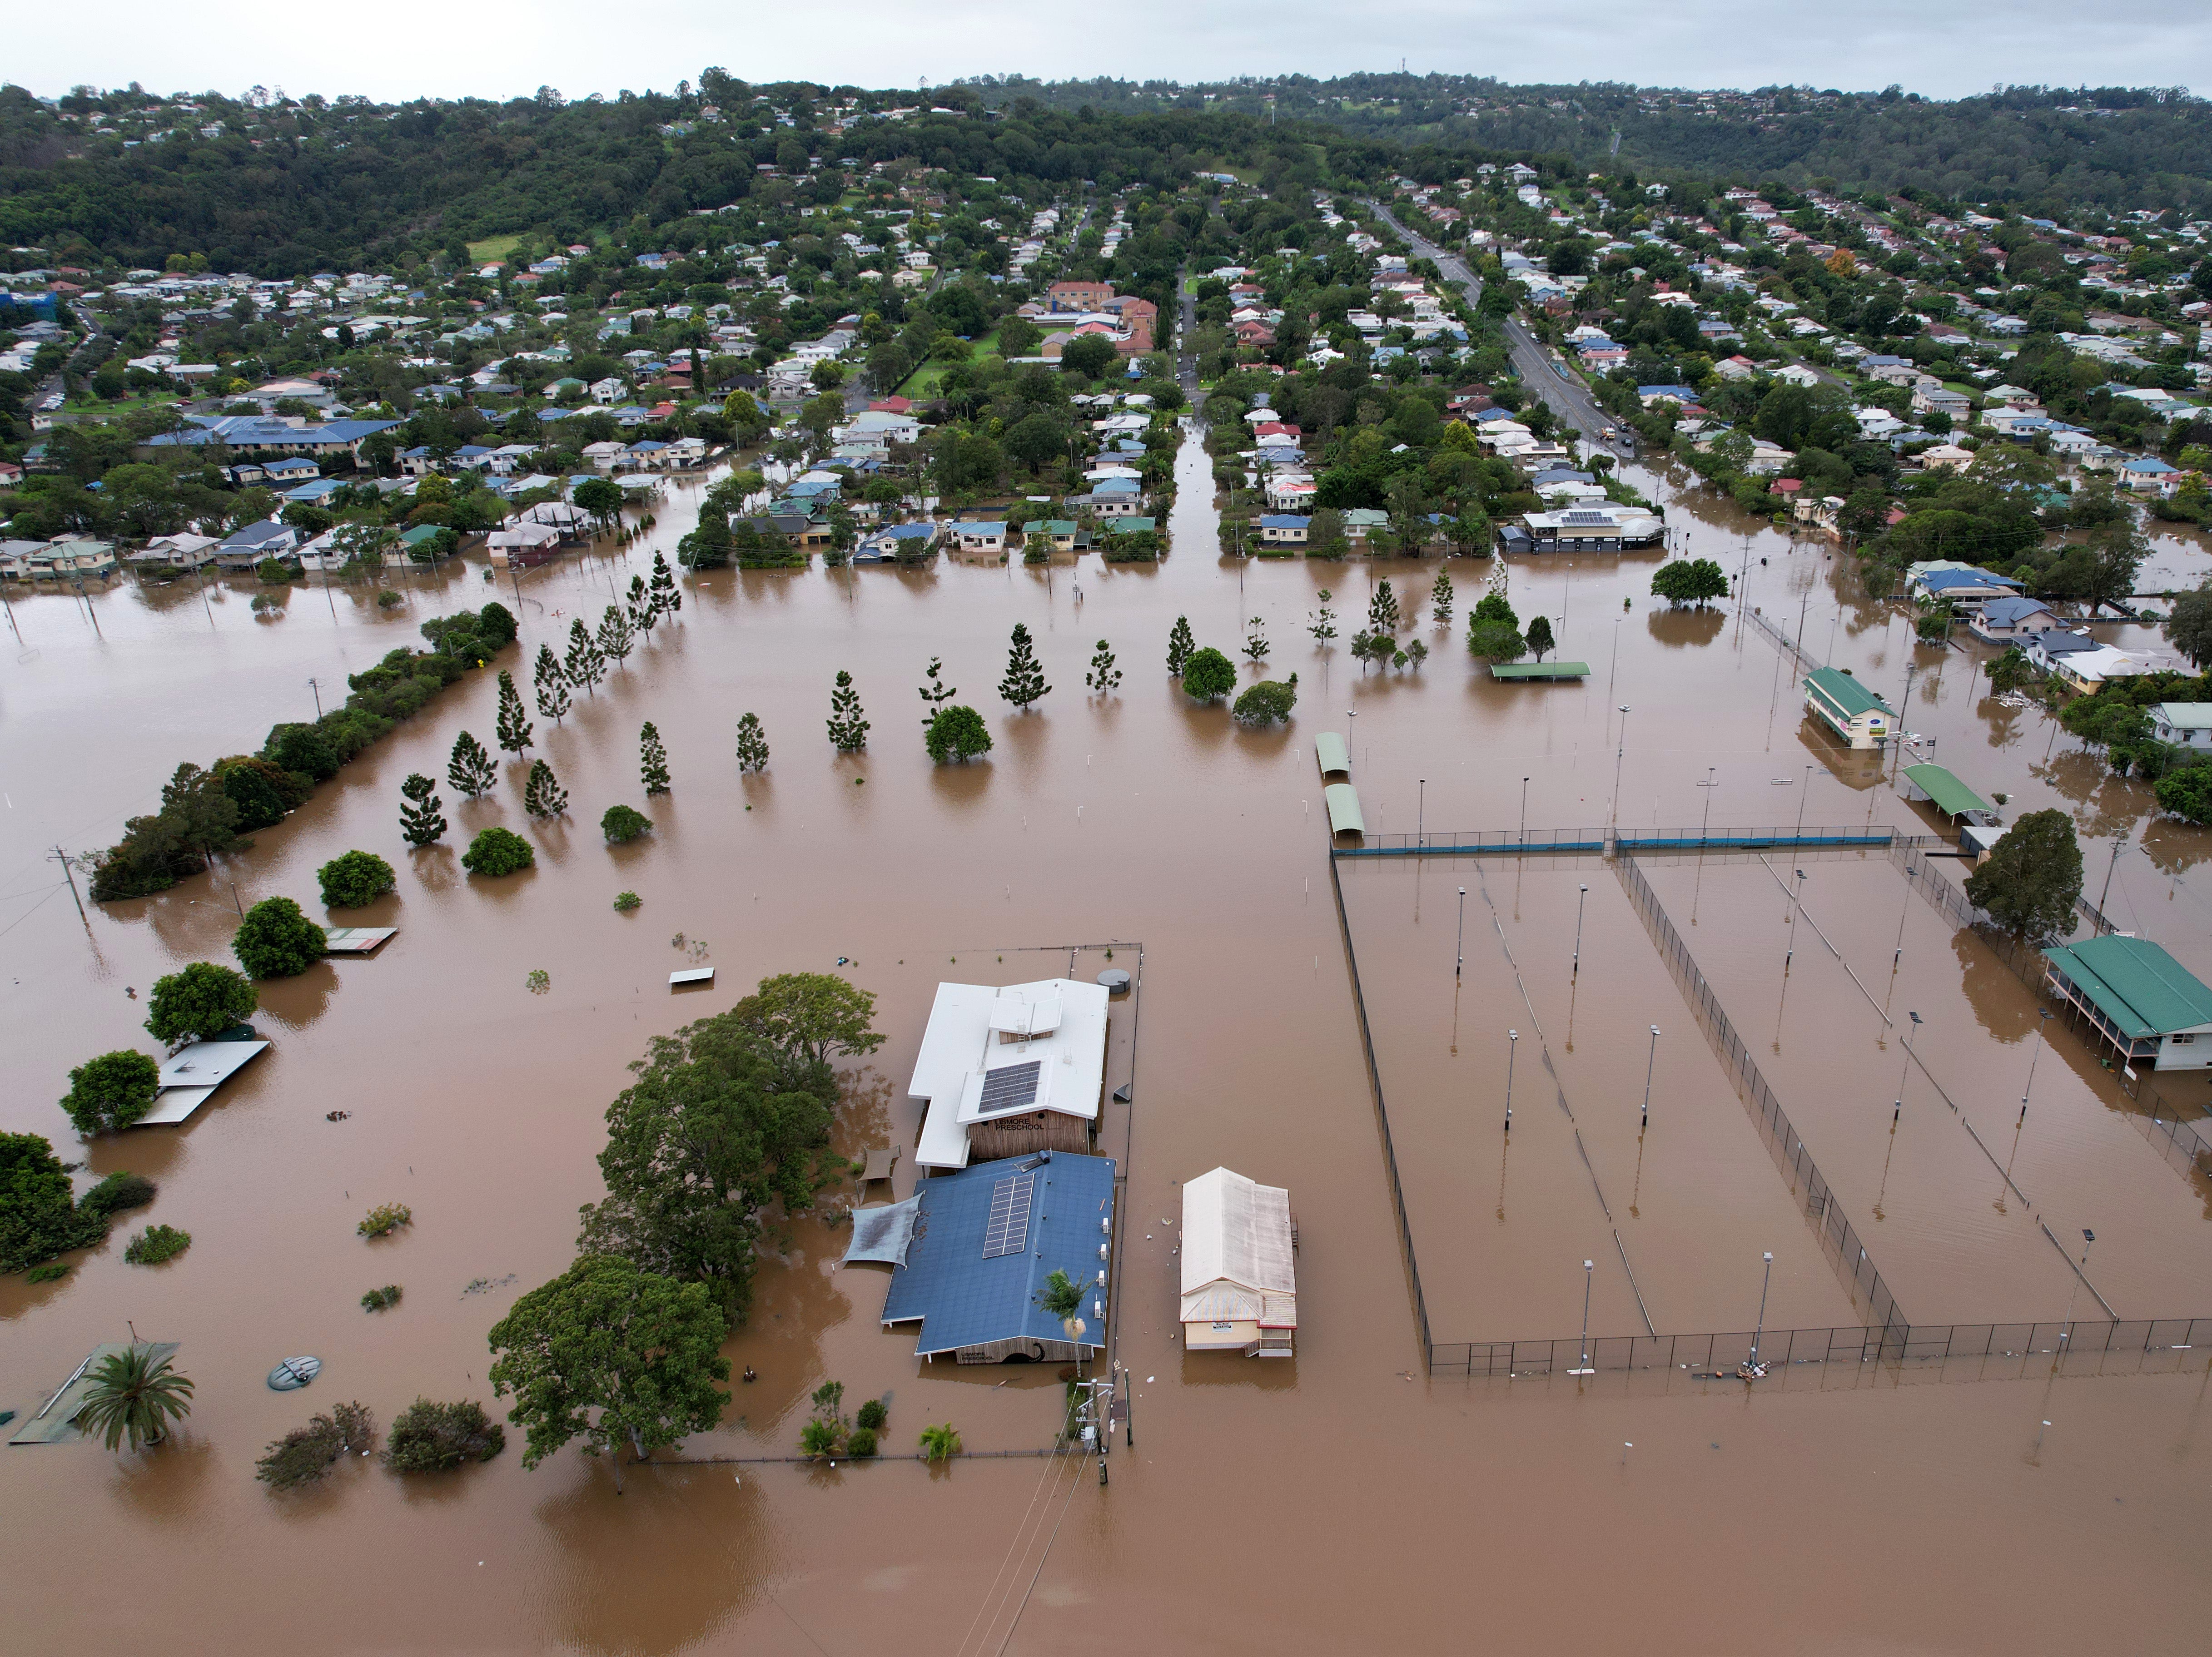 Australia declared a national emergency in March after floods across large swathes of the east coast claimed 22 lives